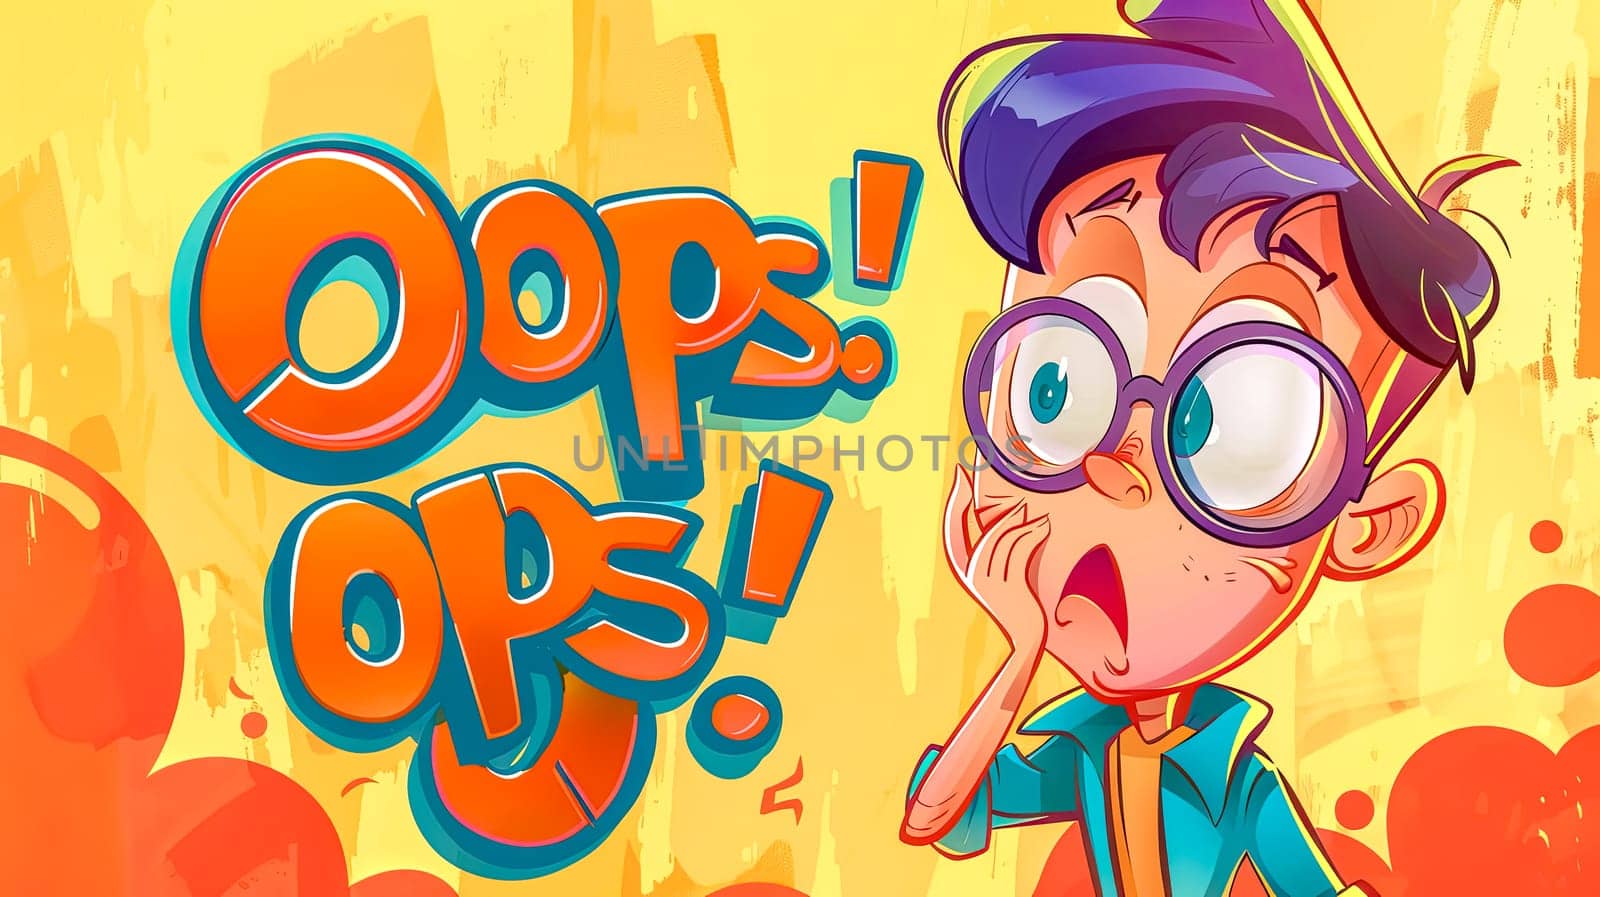 Colorful illustration of a young boy with a surprised and apologetic expression, saying oops!